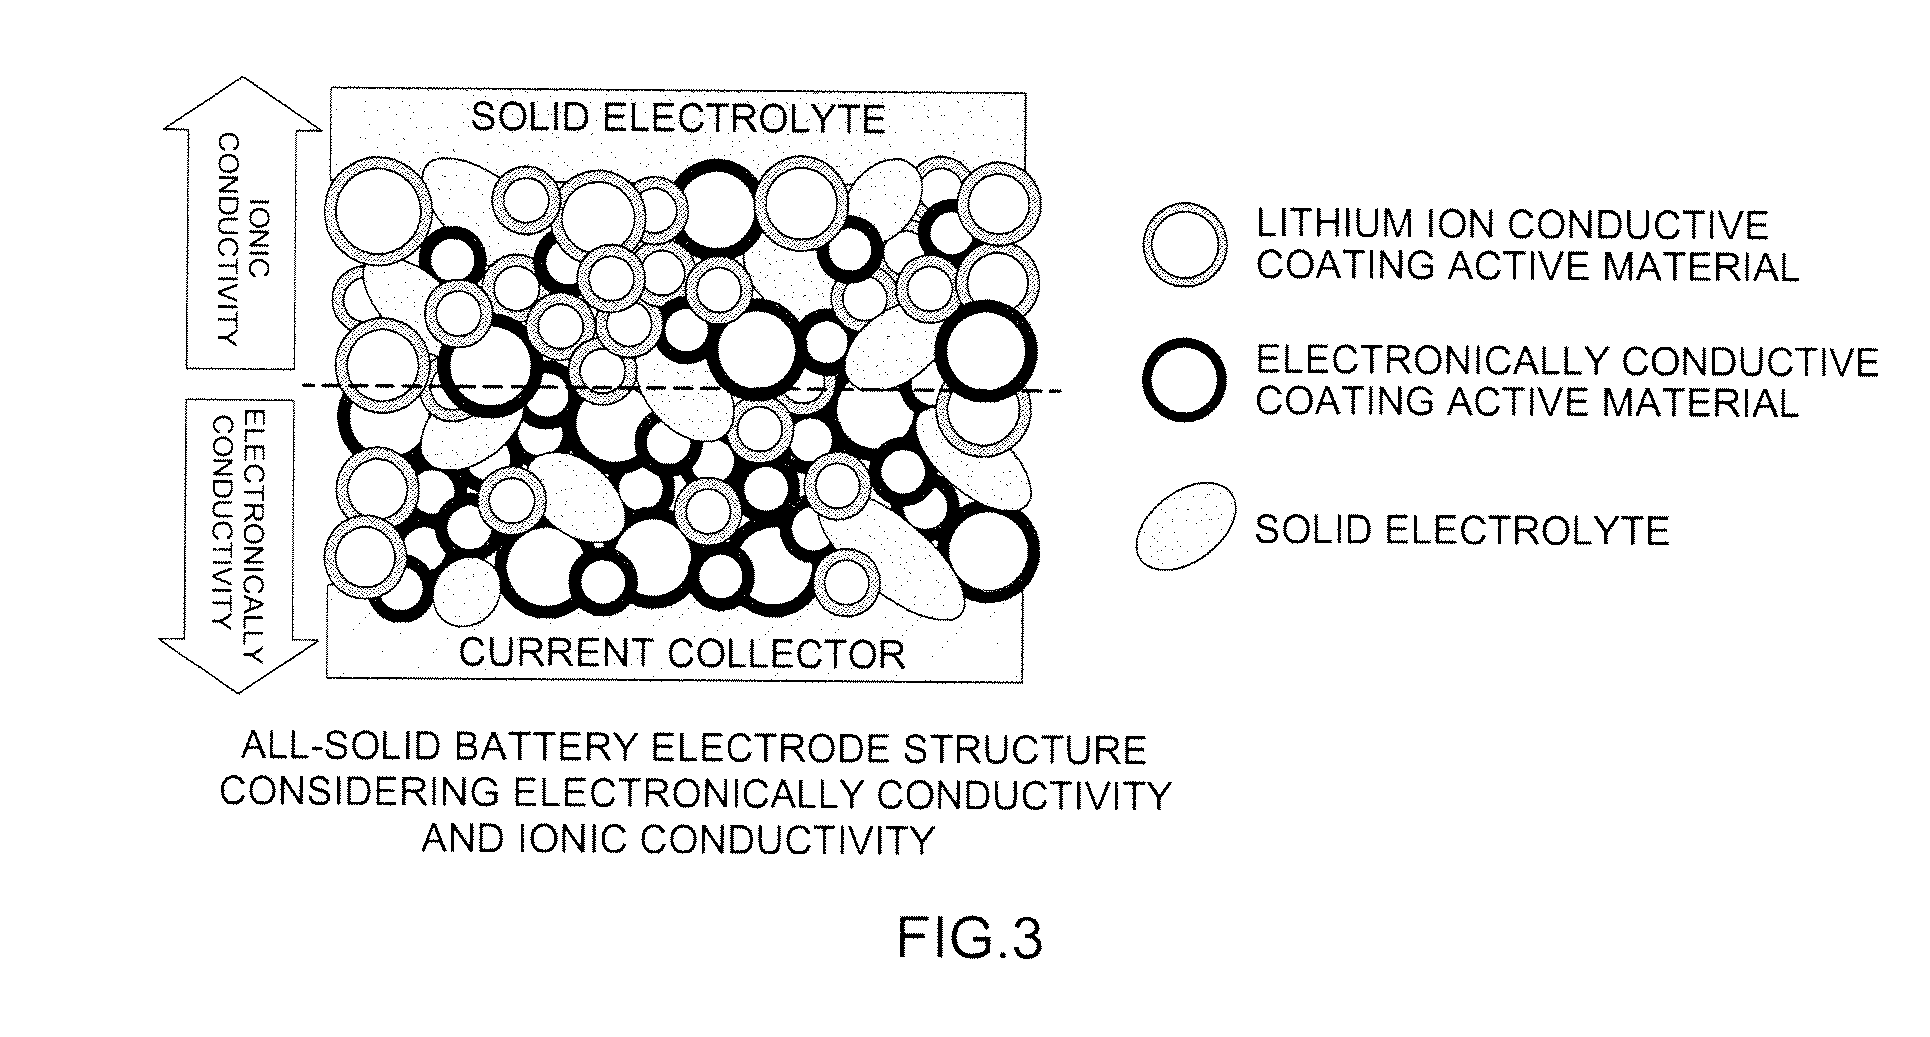 Structure of electrode for all-solid-state batteries